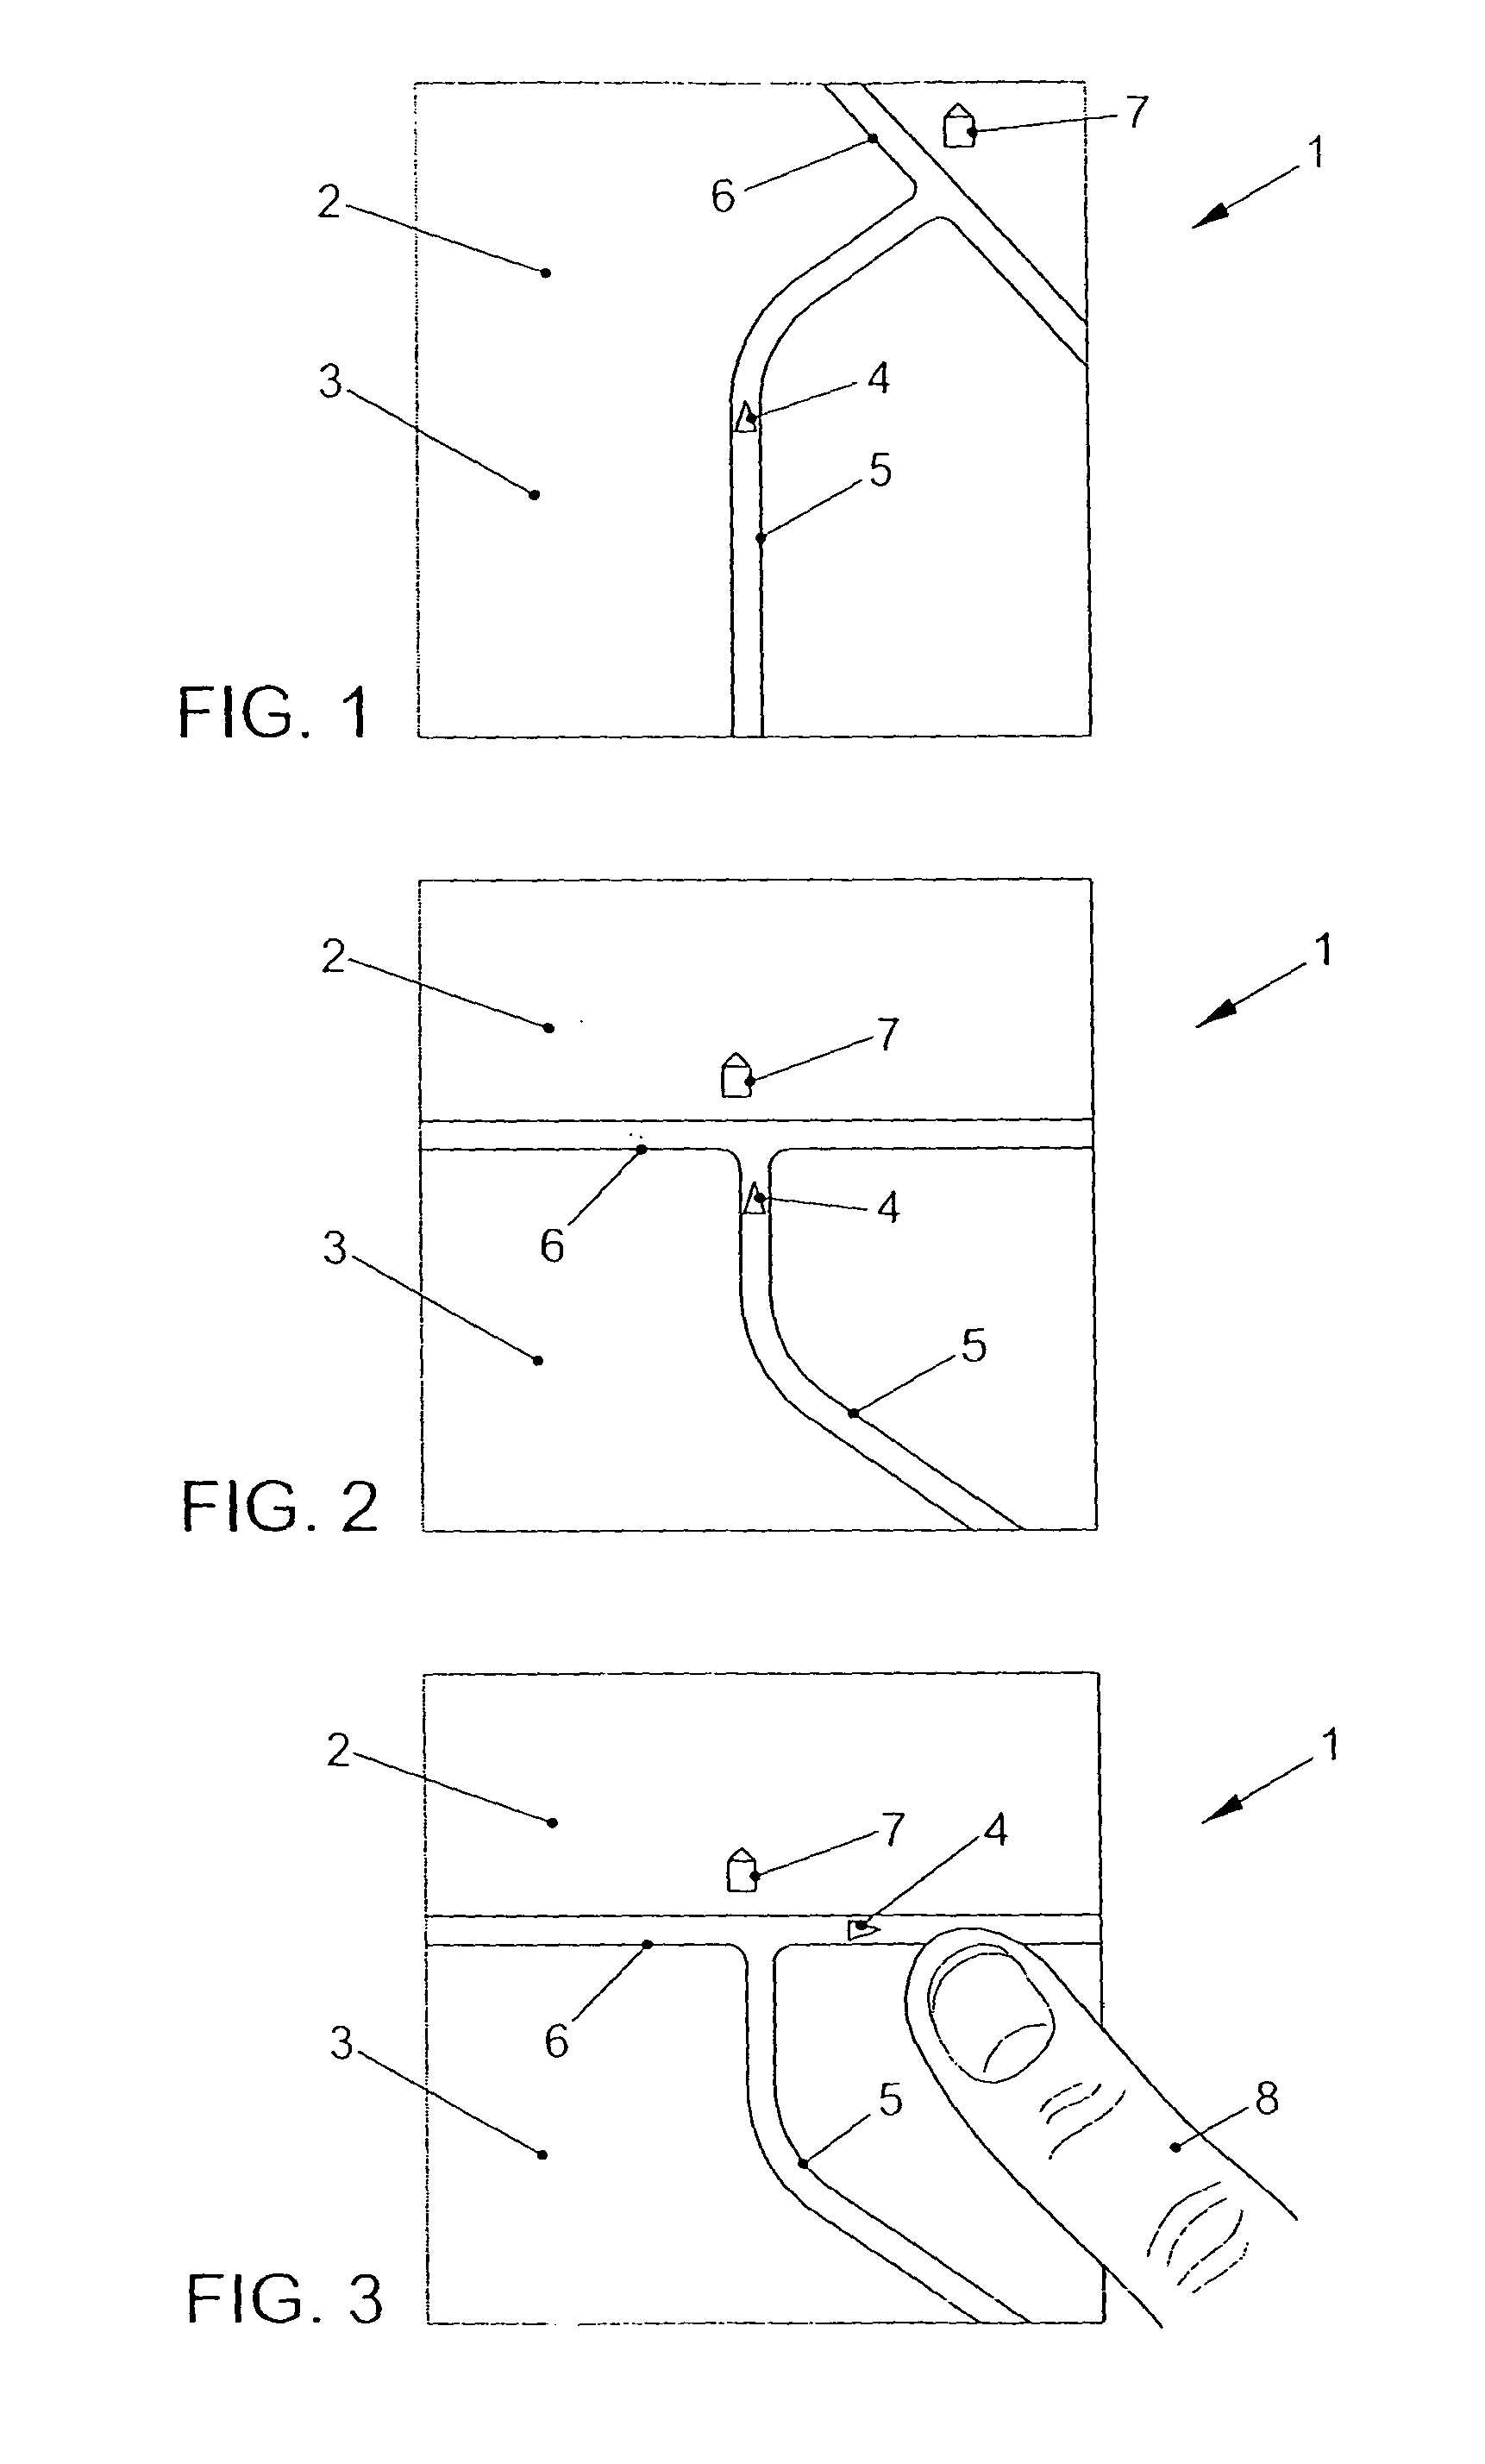 Display method for a display system, display system and operating method for a navigation system of a vehicle